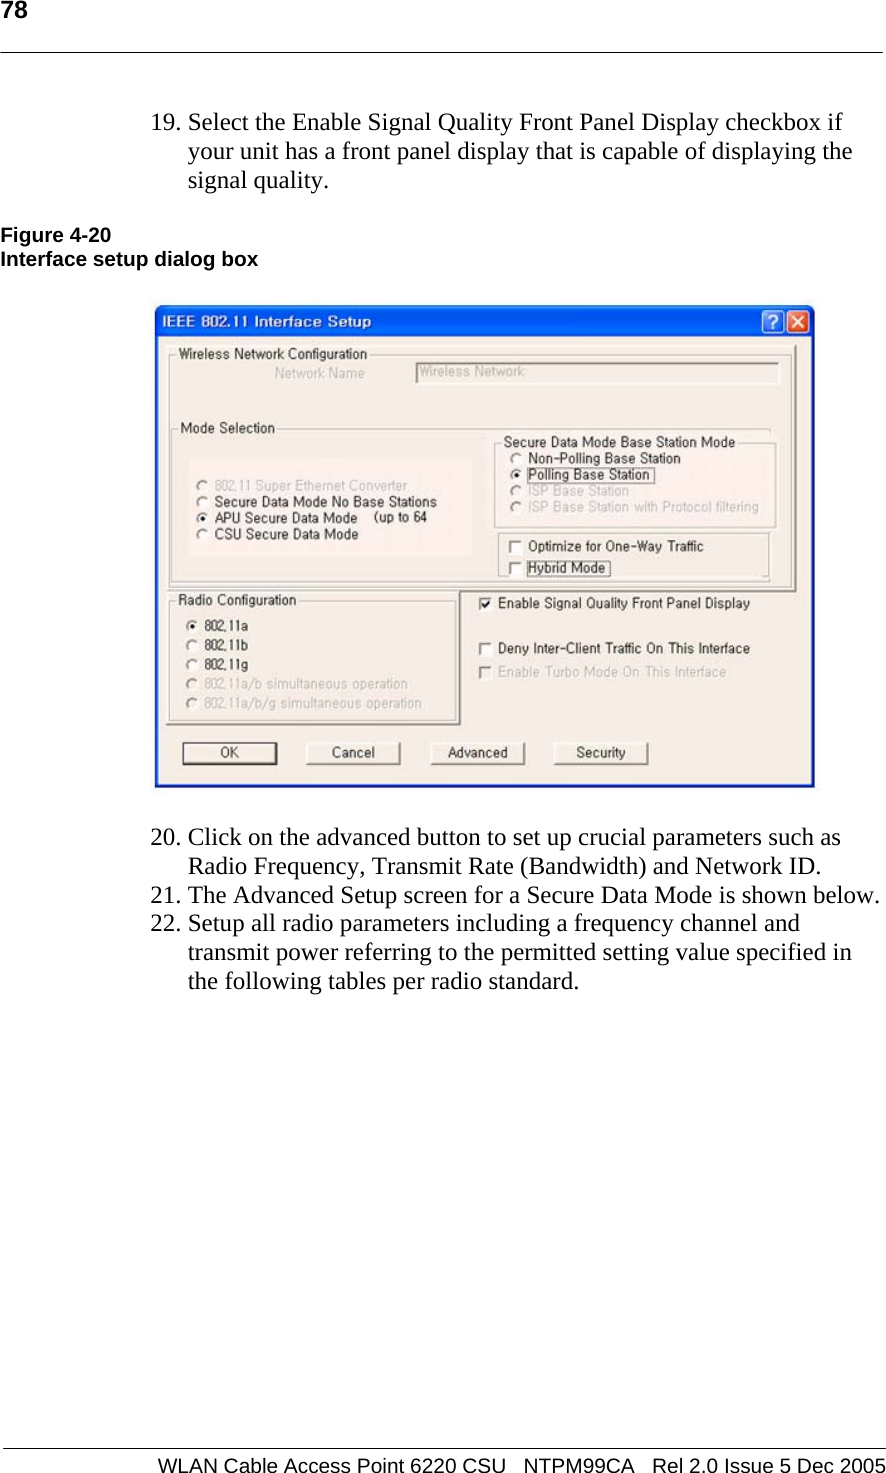   78  WLAN Cable Access Point 6220 CSU   NTPM99CA   Rel 2.0 Issue 5 Dec 2005 19. Select the Enable Signal Quality Front Panel Display checkbox if your unit has a front panel display that is capable of displaying the signal quality.  Figure 4-20 Interface setup dialog box    20. Click on the advanced button to set up crucial parameters such as Radio Frequency, Transmit Rate (Bandwidth) and Network ID. 21. The Advanced Setup screen for a Secure Data Mode is shown below.  22. Setup all radio parameters including a frequency channel and transmit power referring to the permitted setting value specified in the following tables per radio standard.   